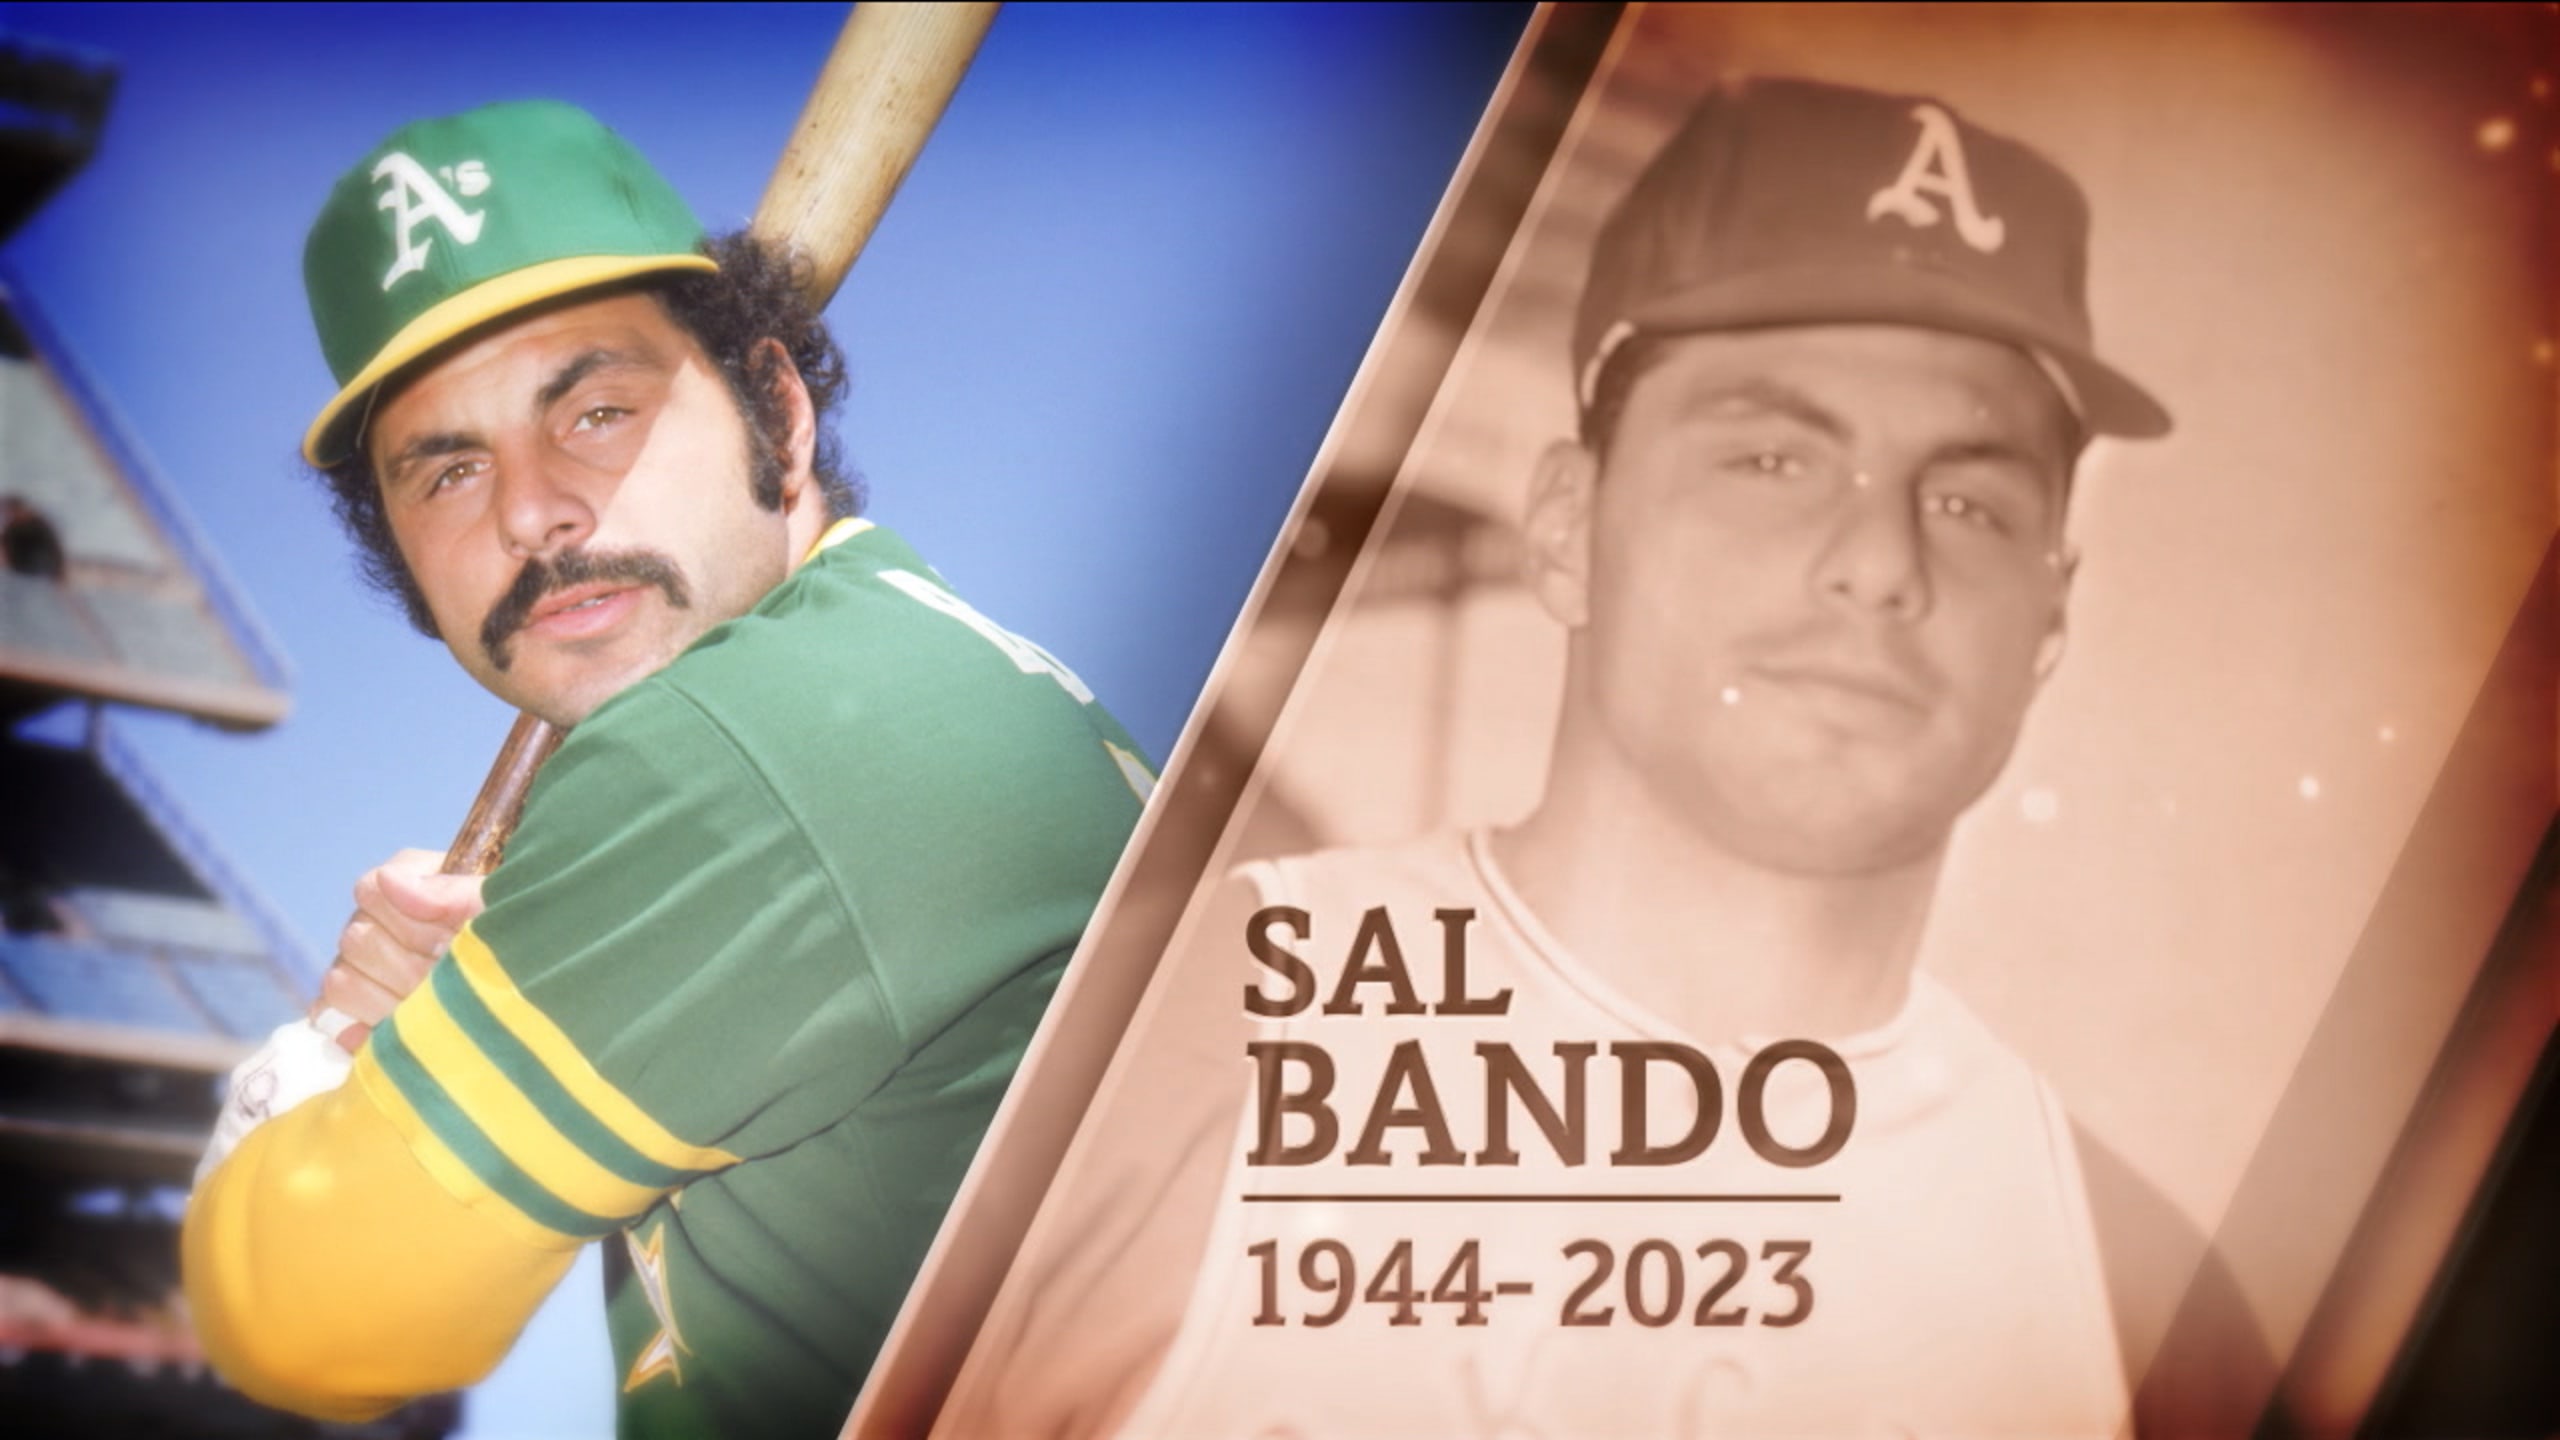 Not in Hall of Fame - 12. Sal Bando